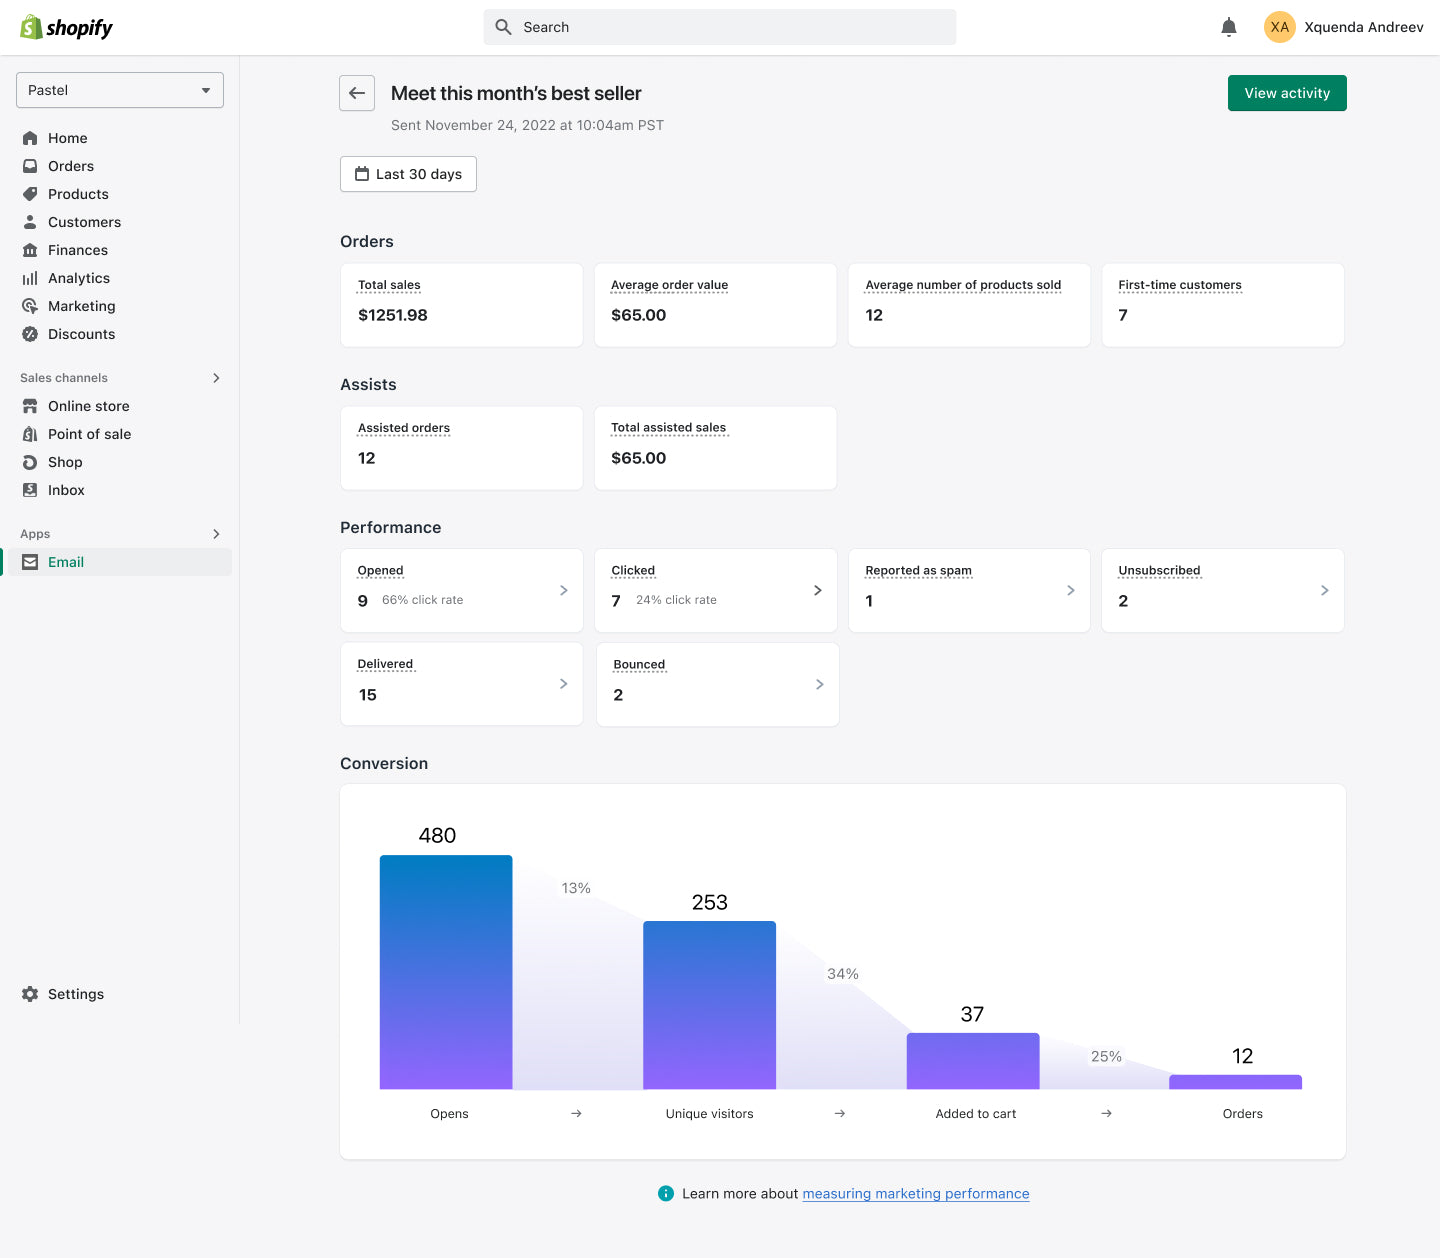 Image of Shopify email analytics dashboard where you can view performance metrics, open rates, sales won and more.